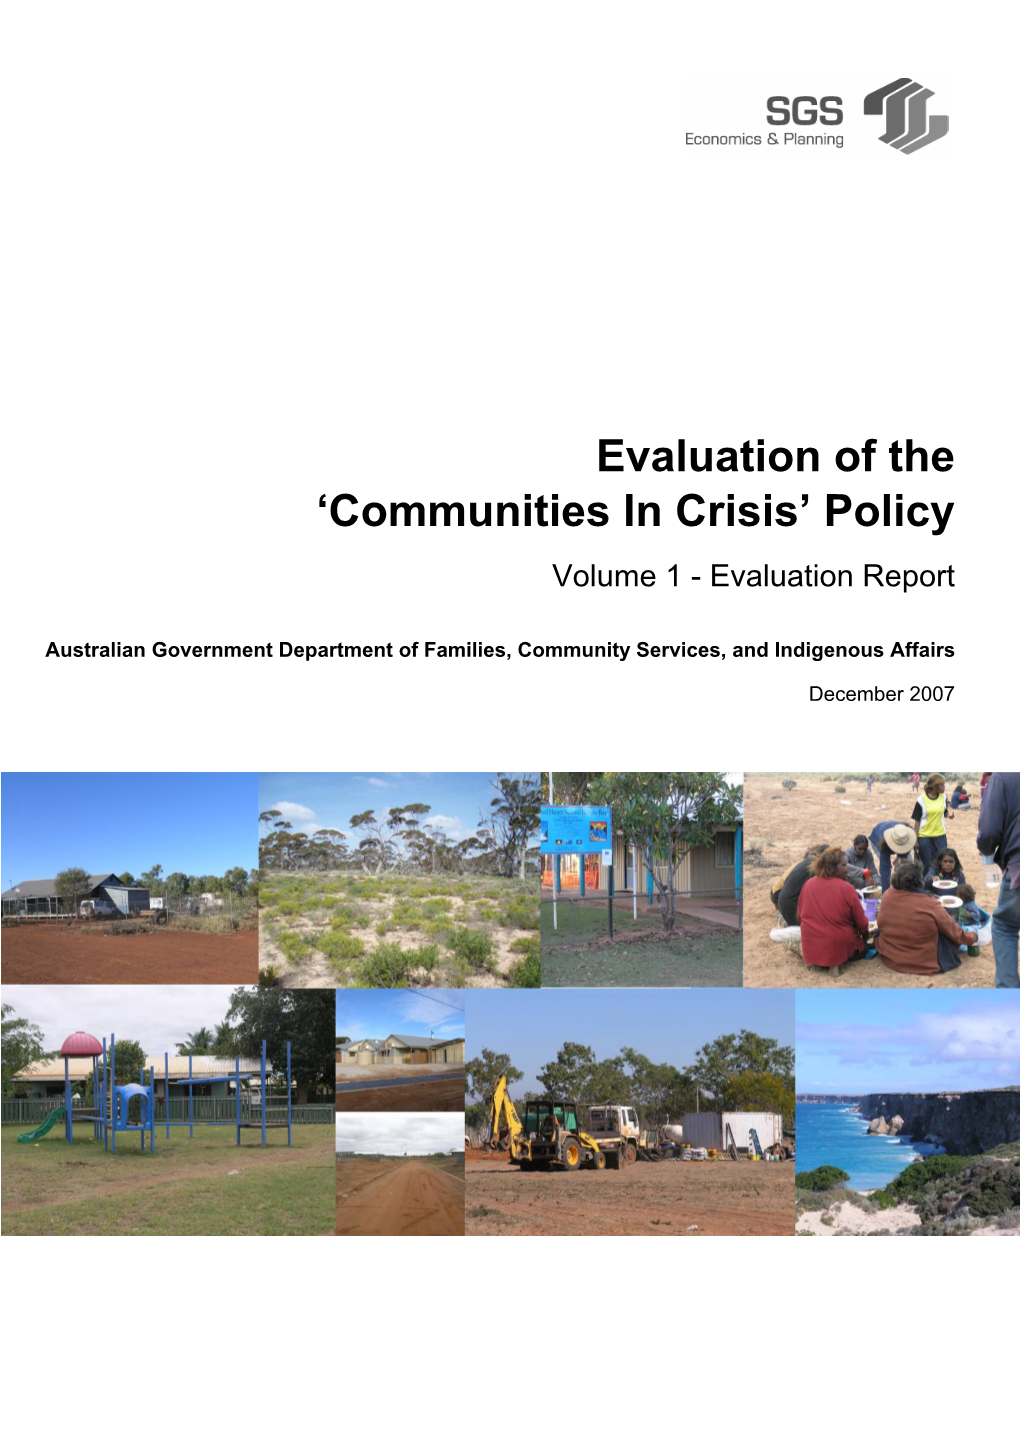 Communities in Crisis’ Policy Volume 1 - Evaluation Report